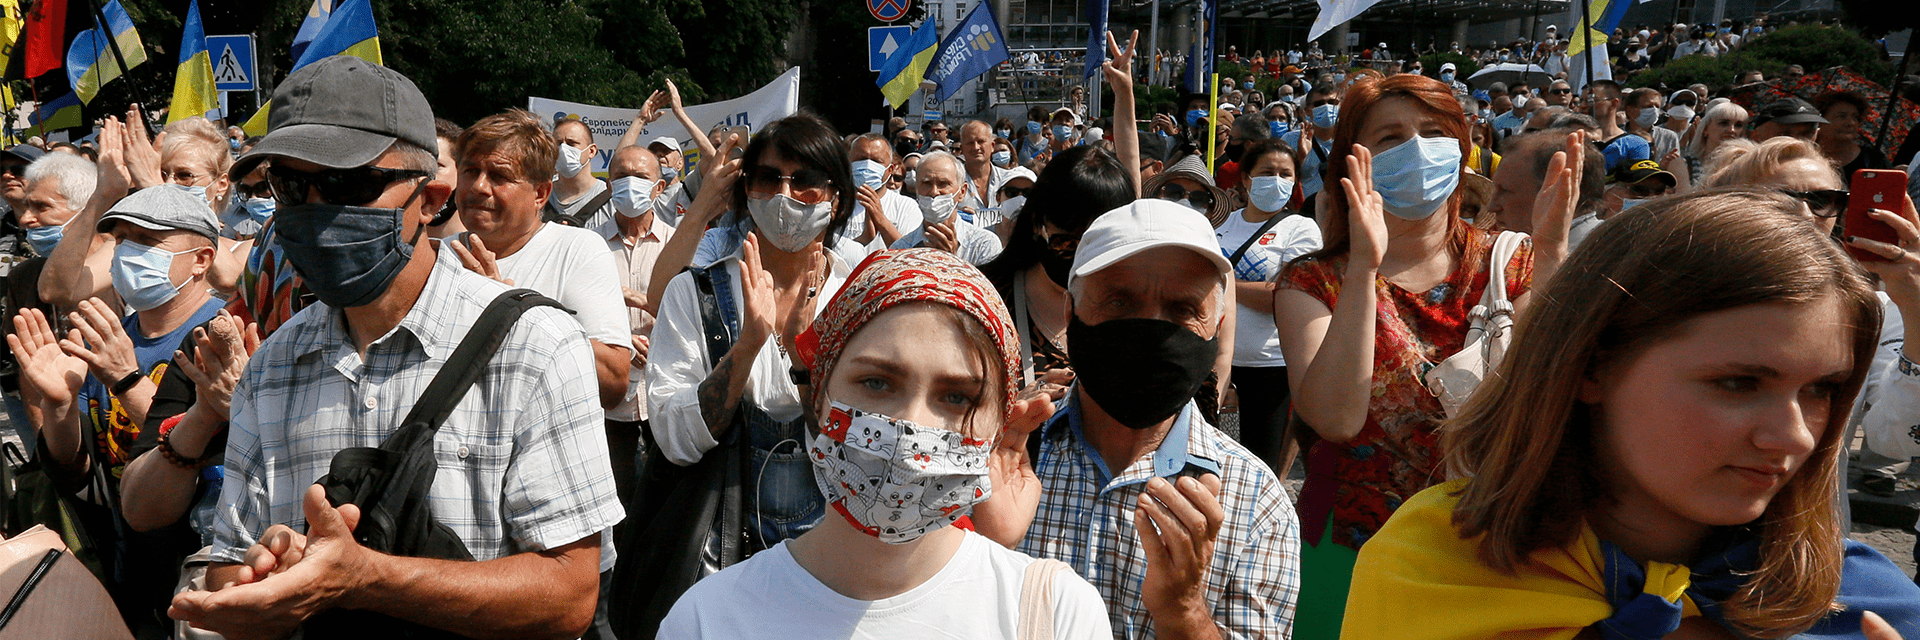 Supporters gathered in front of a court building in Ukraine, many of them clapping and wearing face masks